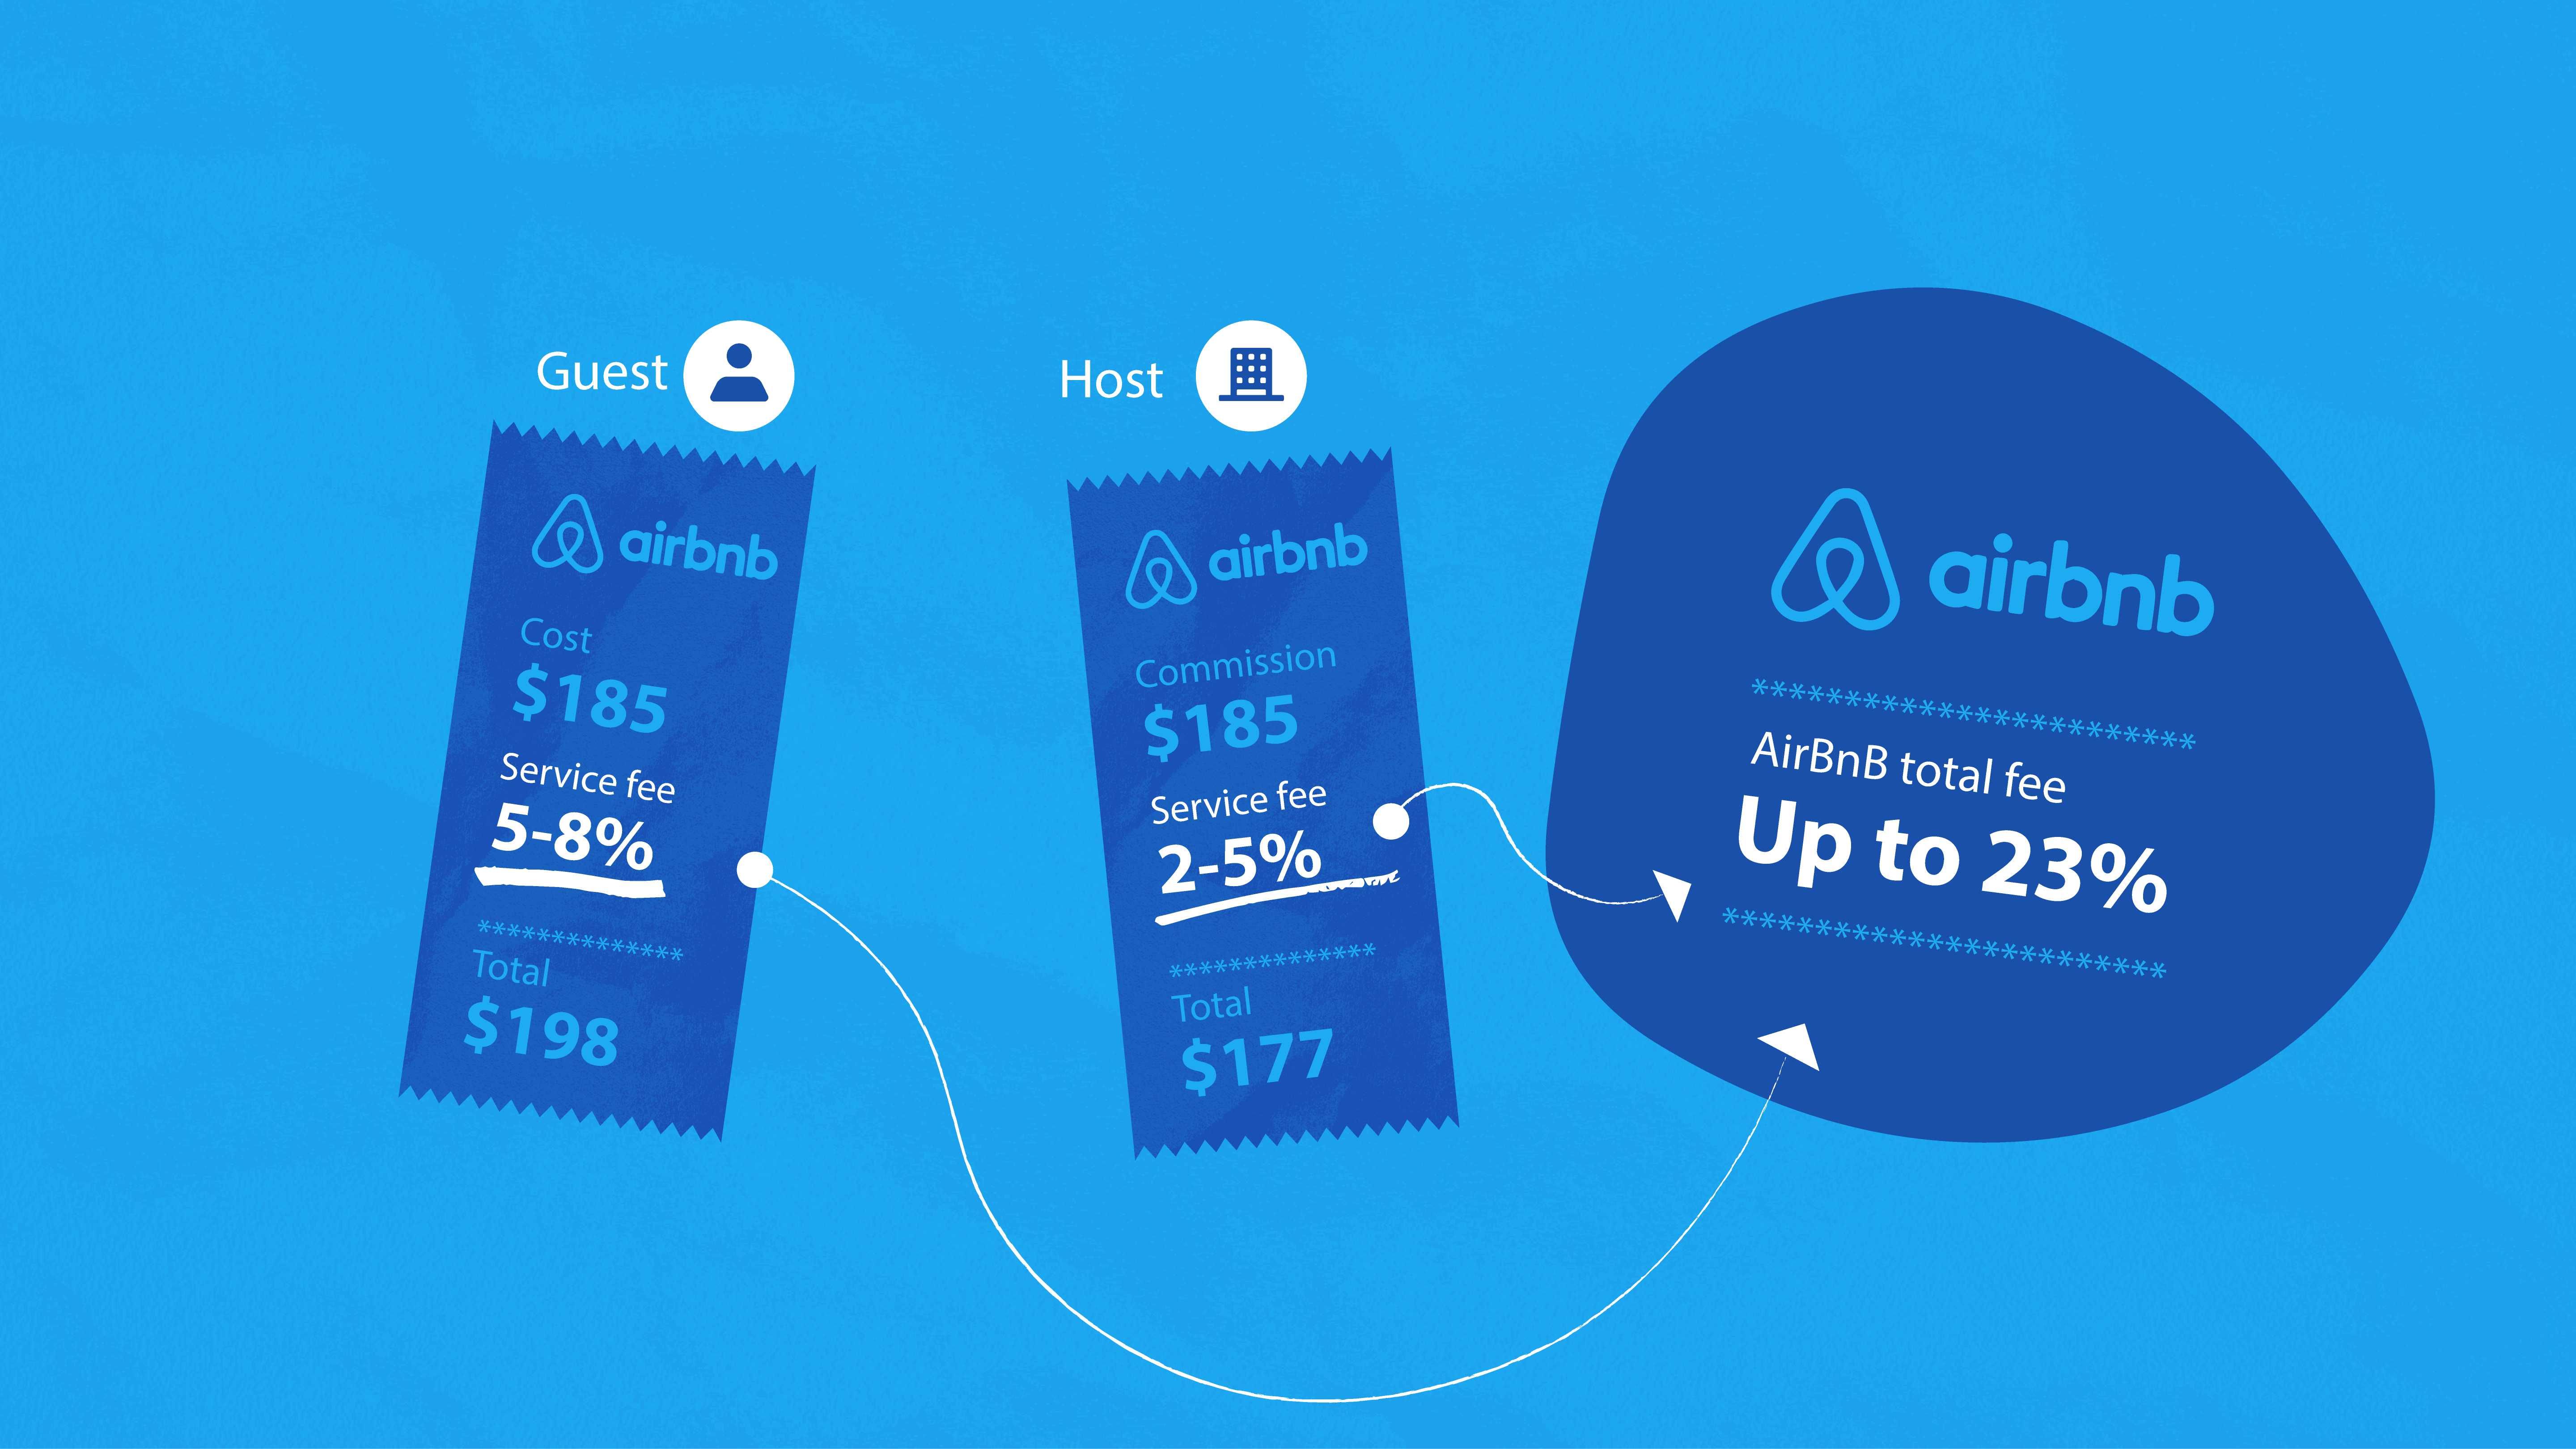 Graphic showing pricing breakdown of an Airbnb charge for service fees, including a host fee and guest service fee.